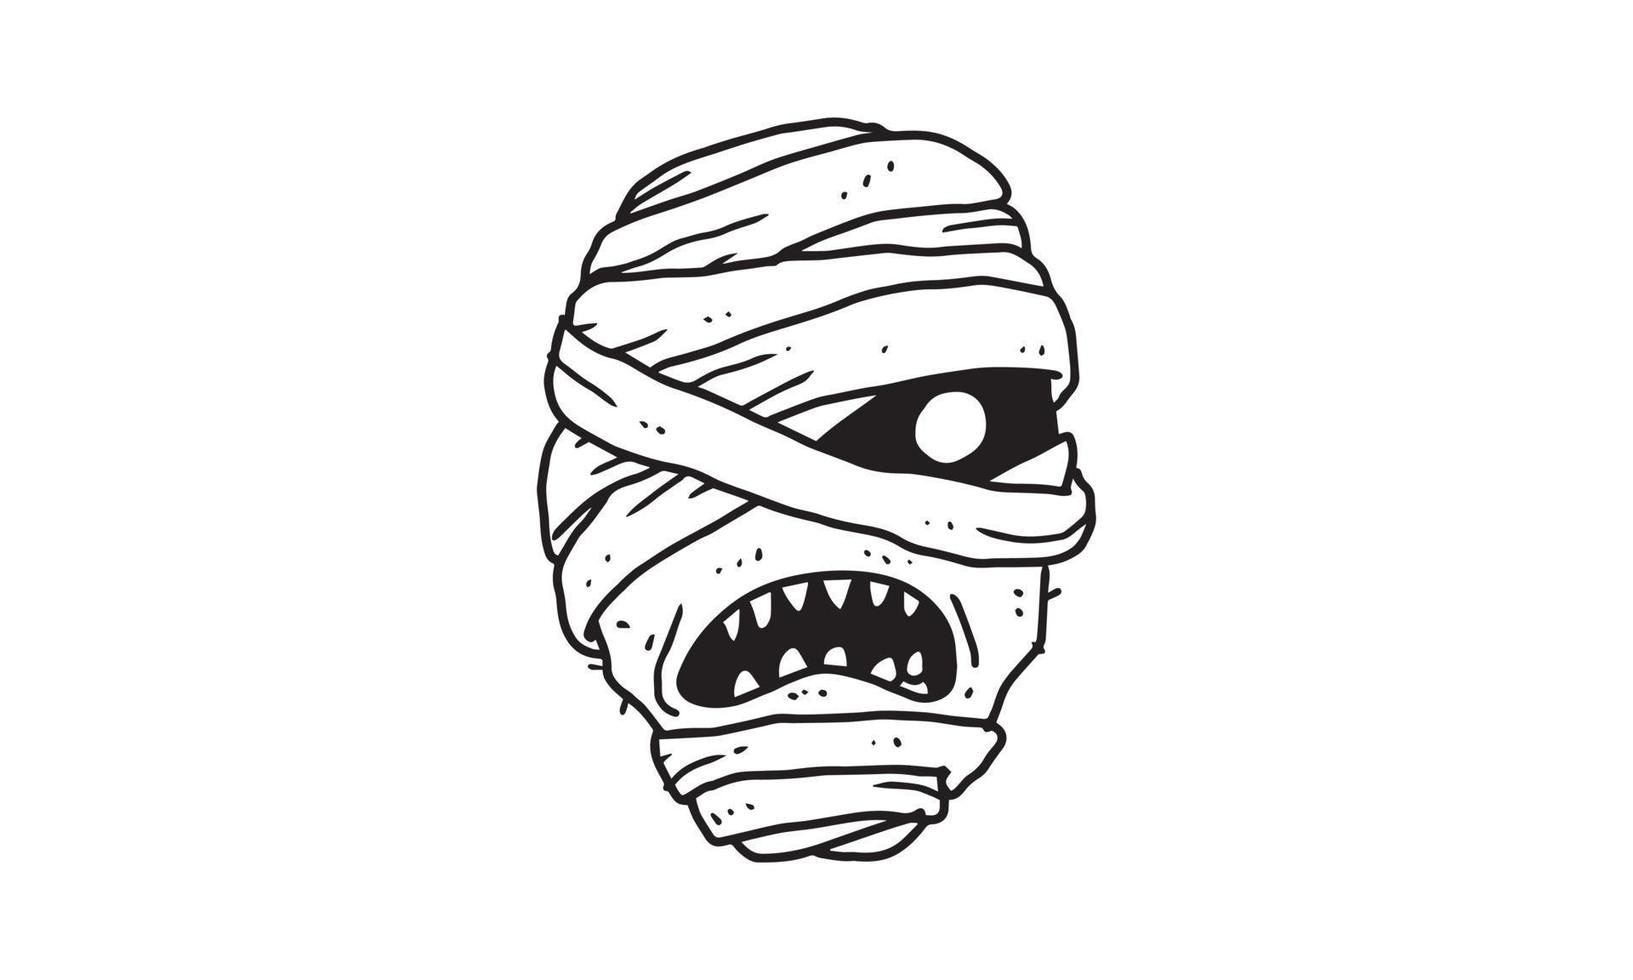 scary angry mummy head isolated on white background. outlined cartoon drawing of creepy, gothic, death icon for tattoo, poster, halloween theme, etc. vector